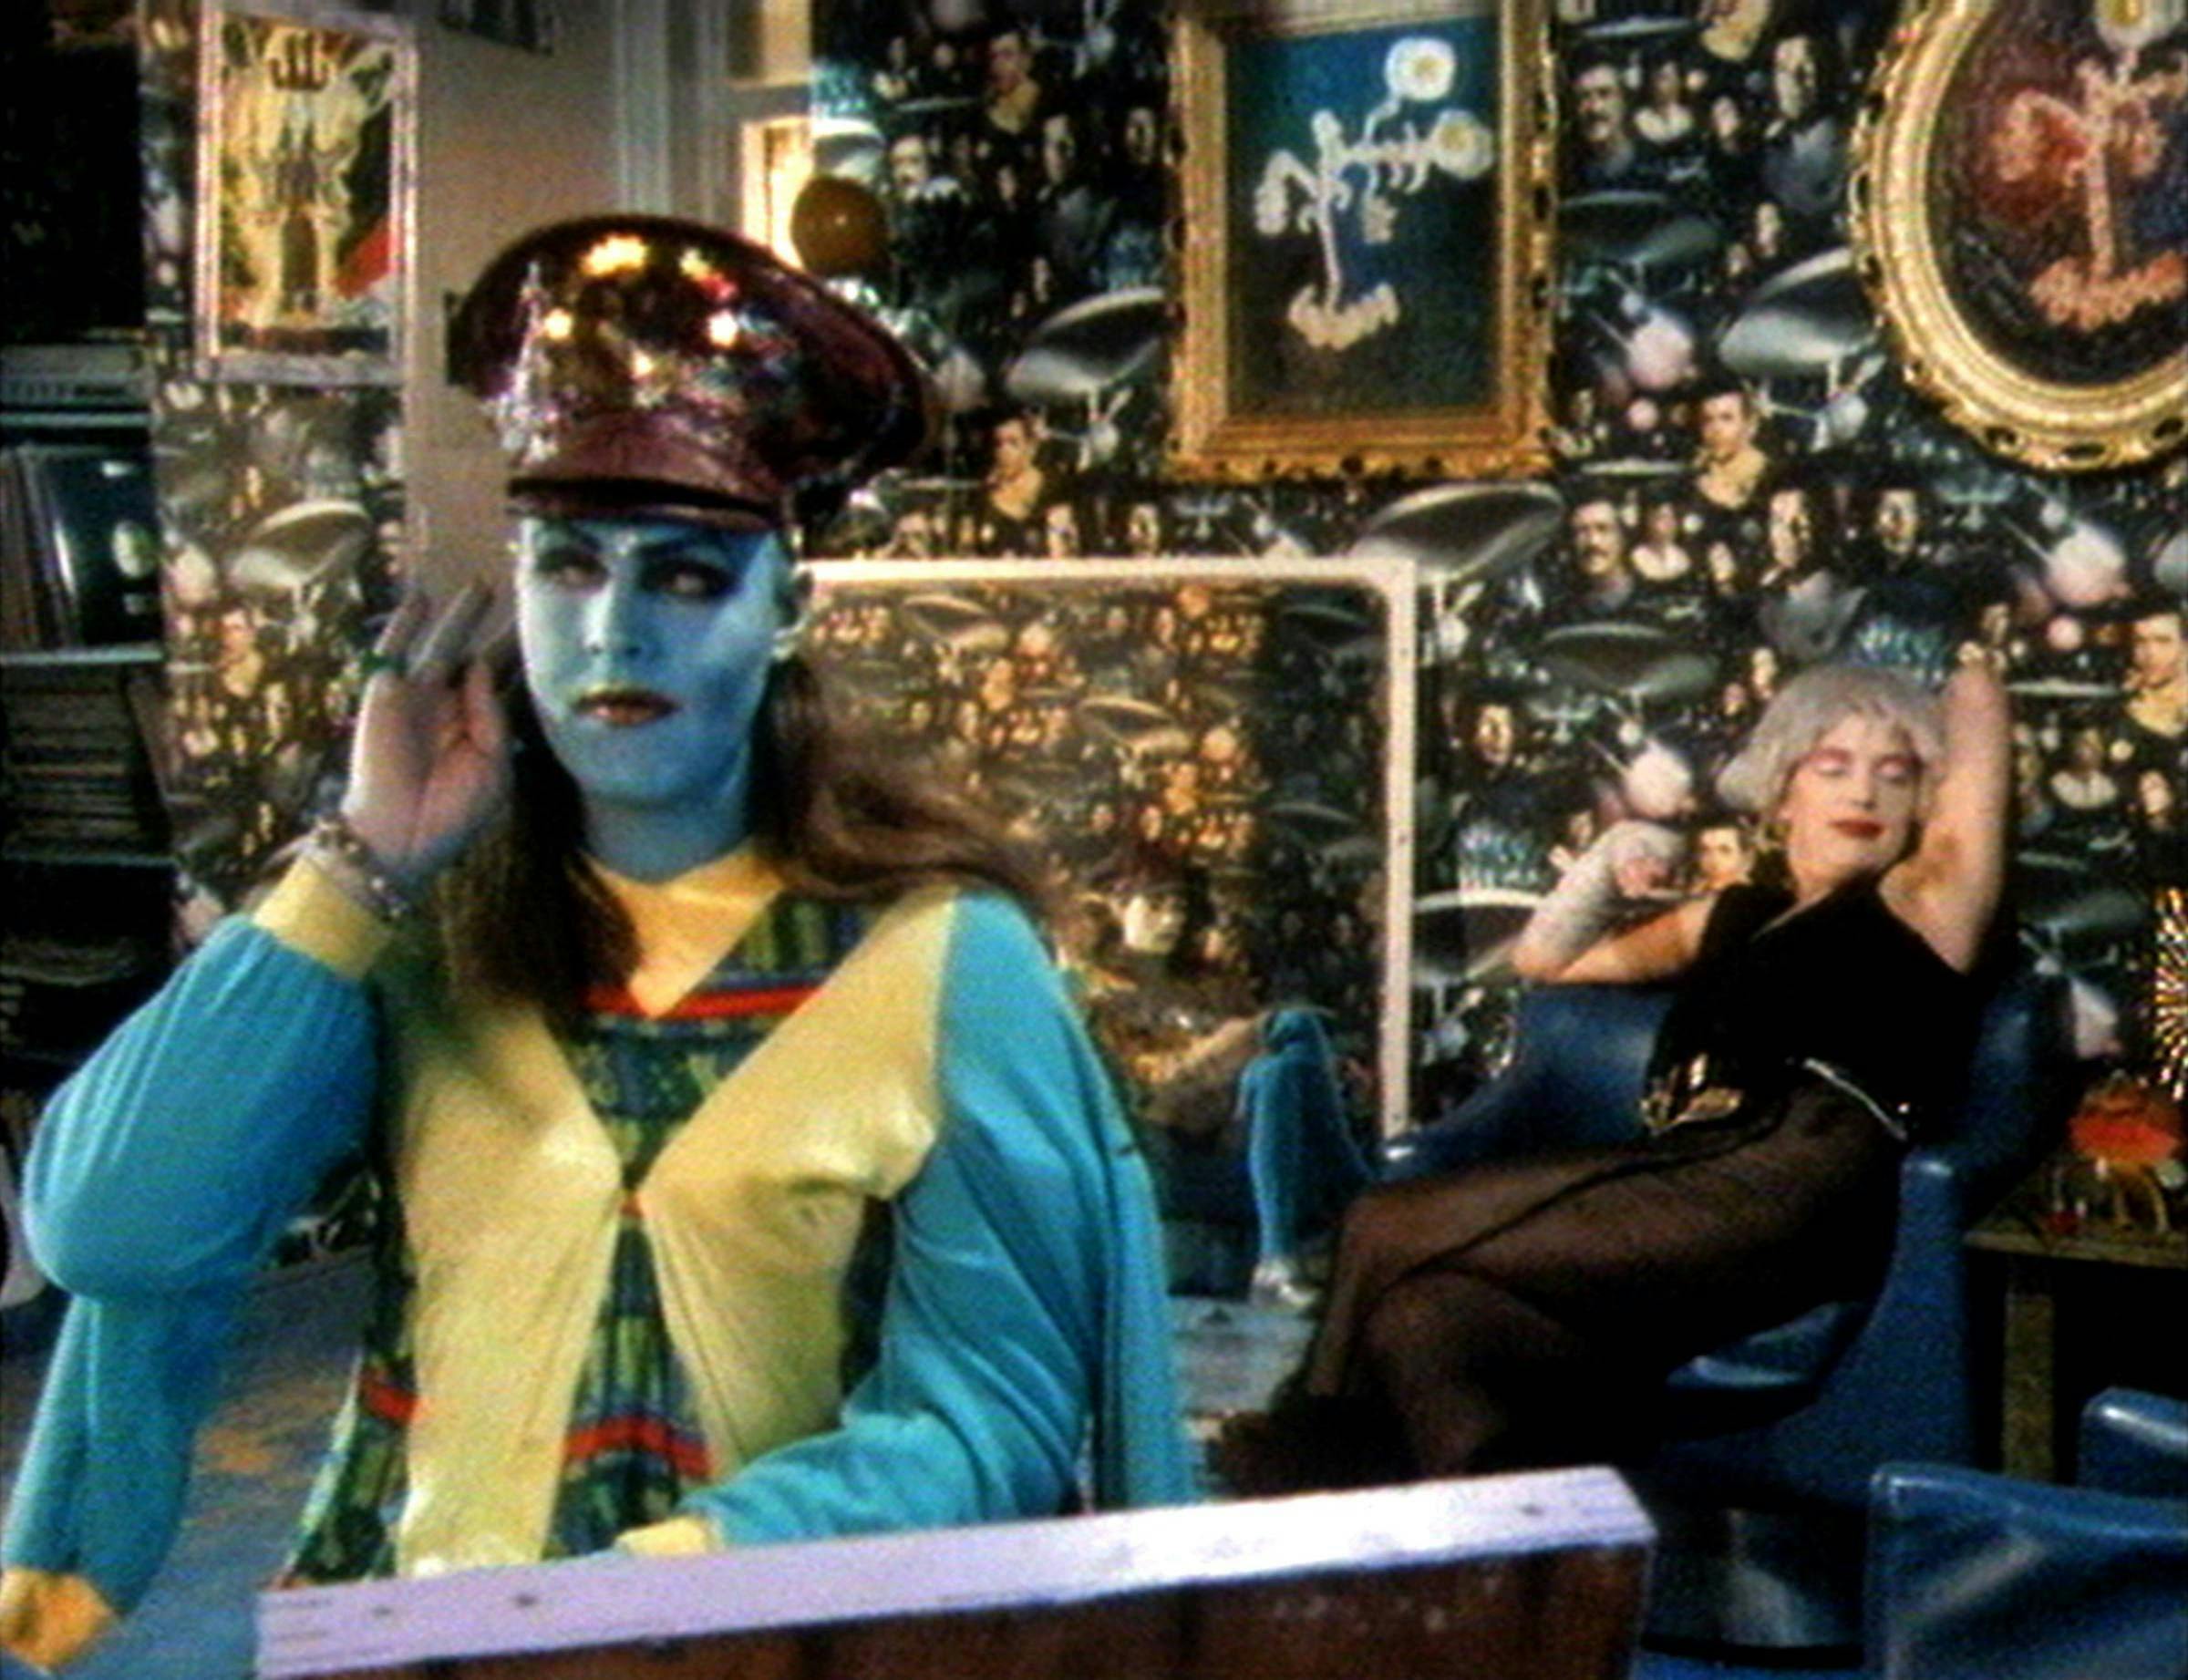 Someone sits in the foreground holding their hand up to their ear. Their face is painted blue and they're wearing a large hat. In the background, someone sits reclining backwards. The room is decorated with a floral wallpaper.